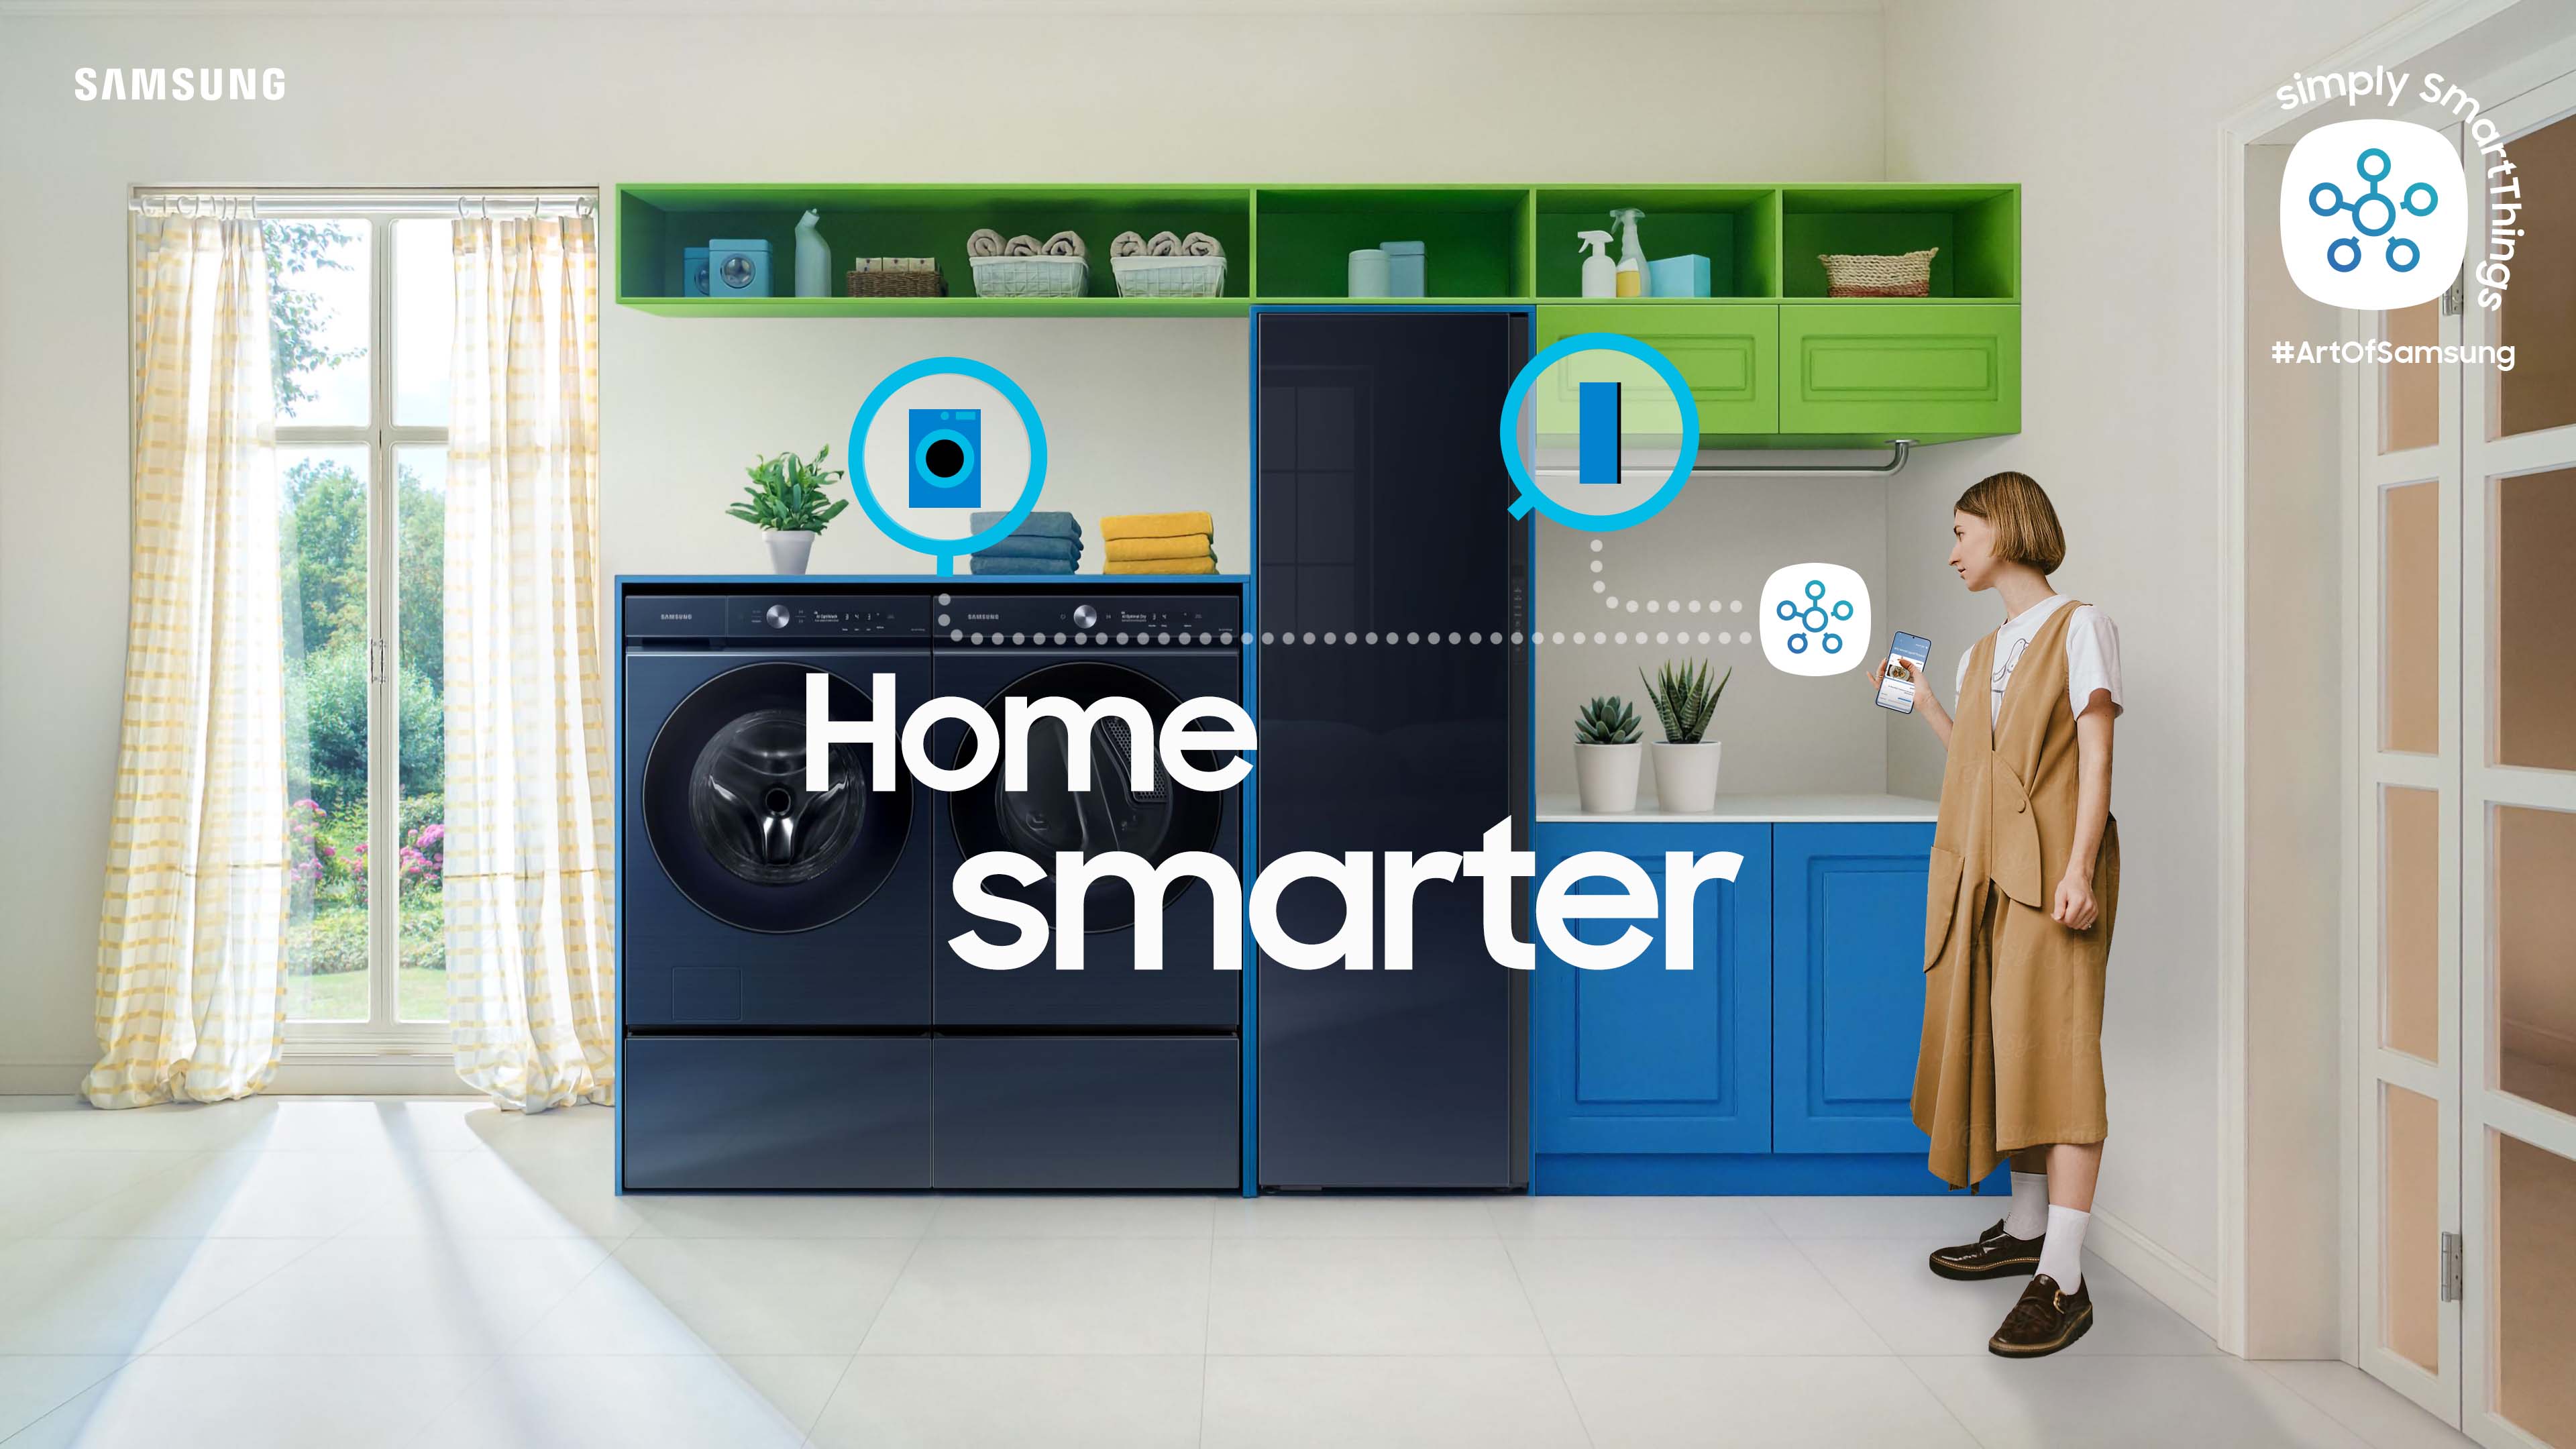 A graphic ad featuring Samsung smart appliances 